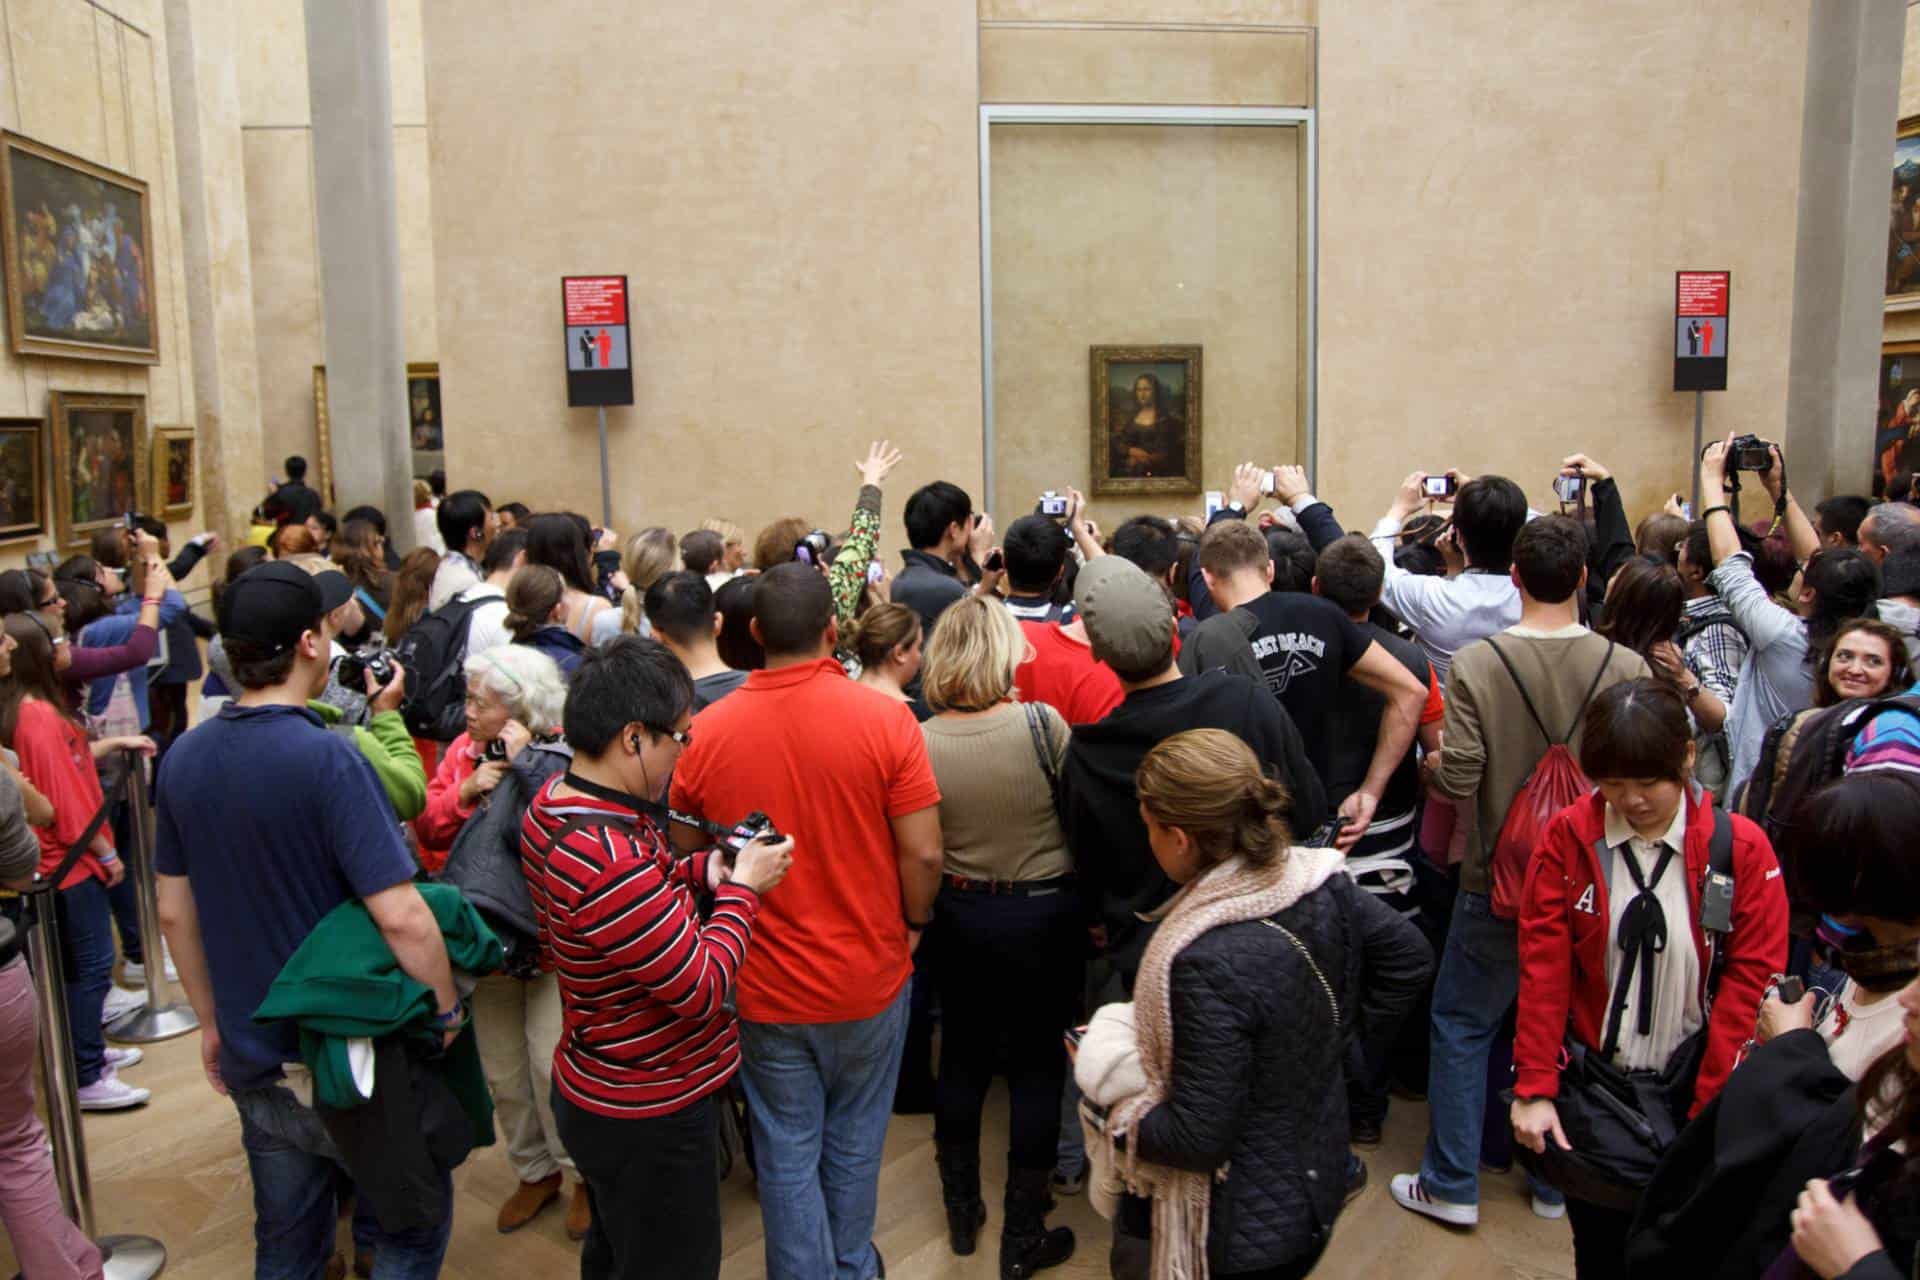 Why is the Mona Lisa so important?